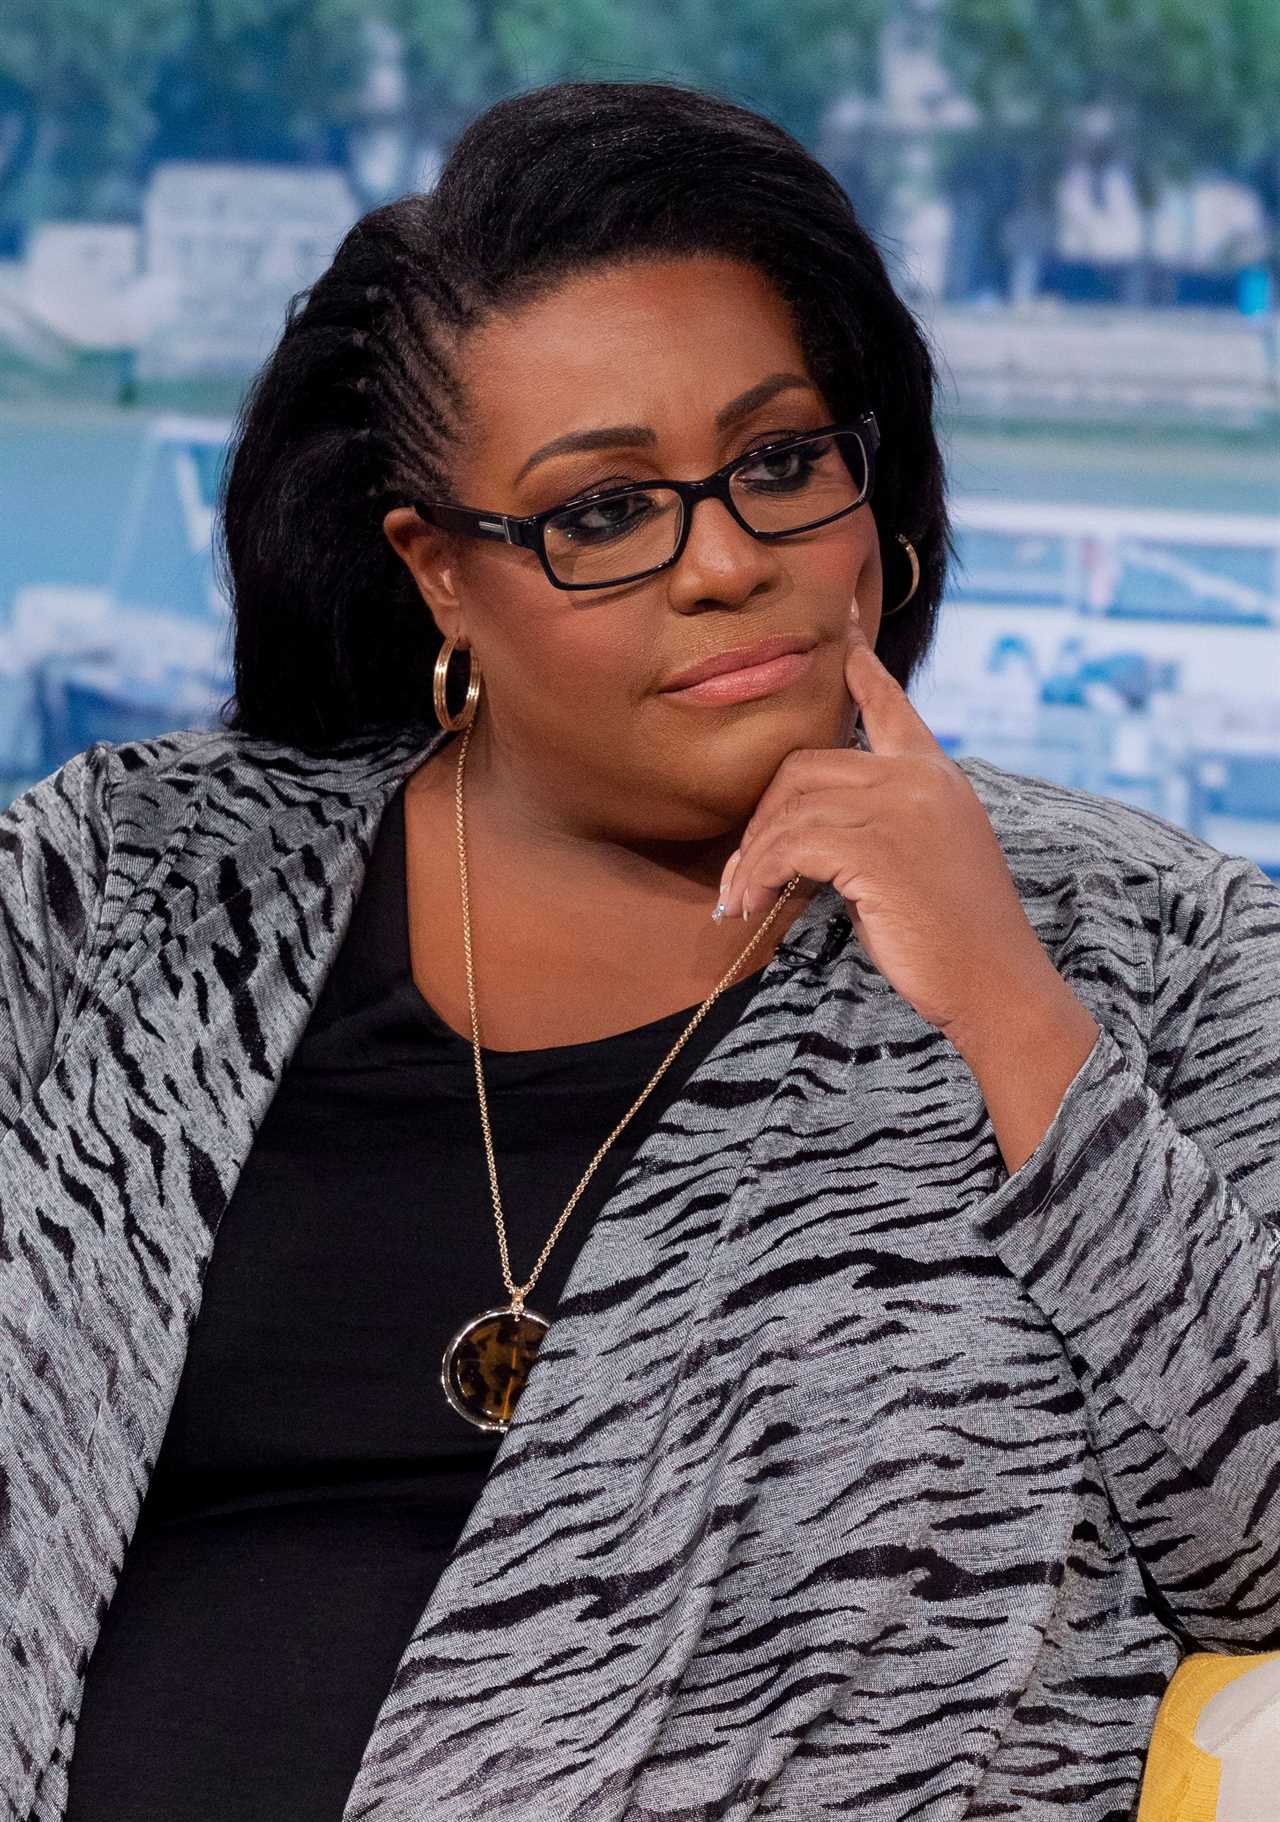 I was duped and lost a fortune like Alison Hammond – it’s sad she was scared into it by lies, says Celebs Go Dating star